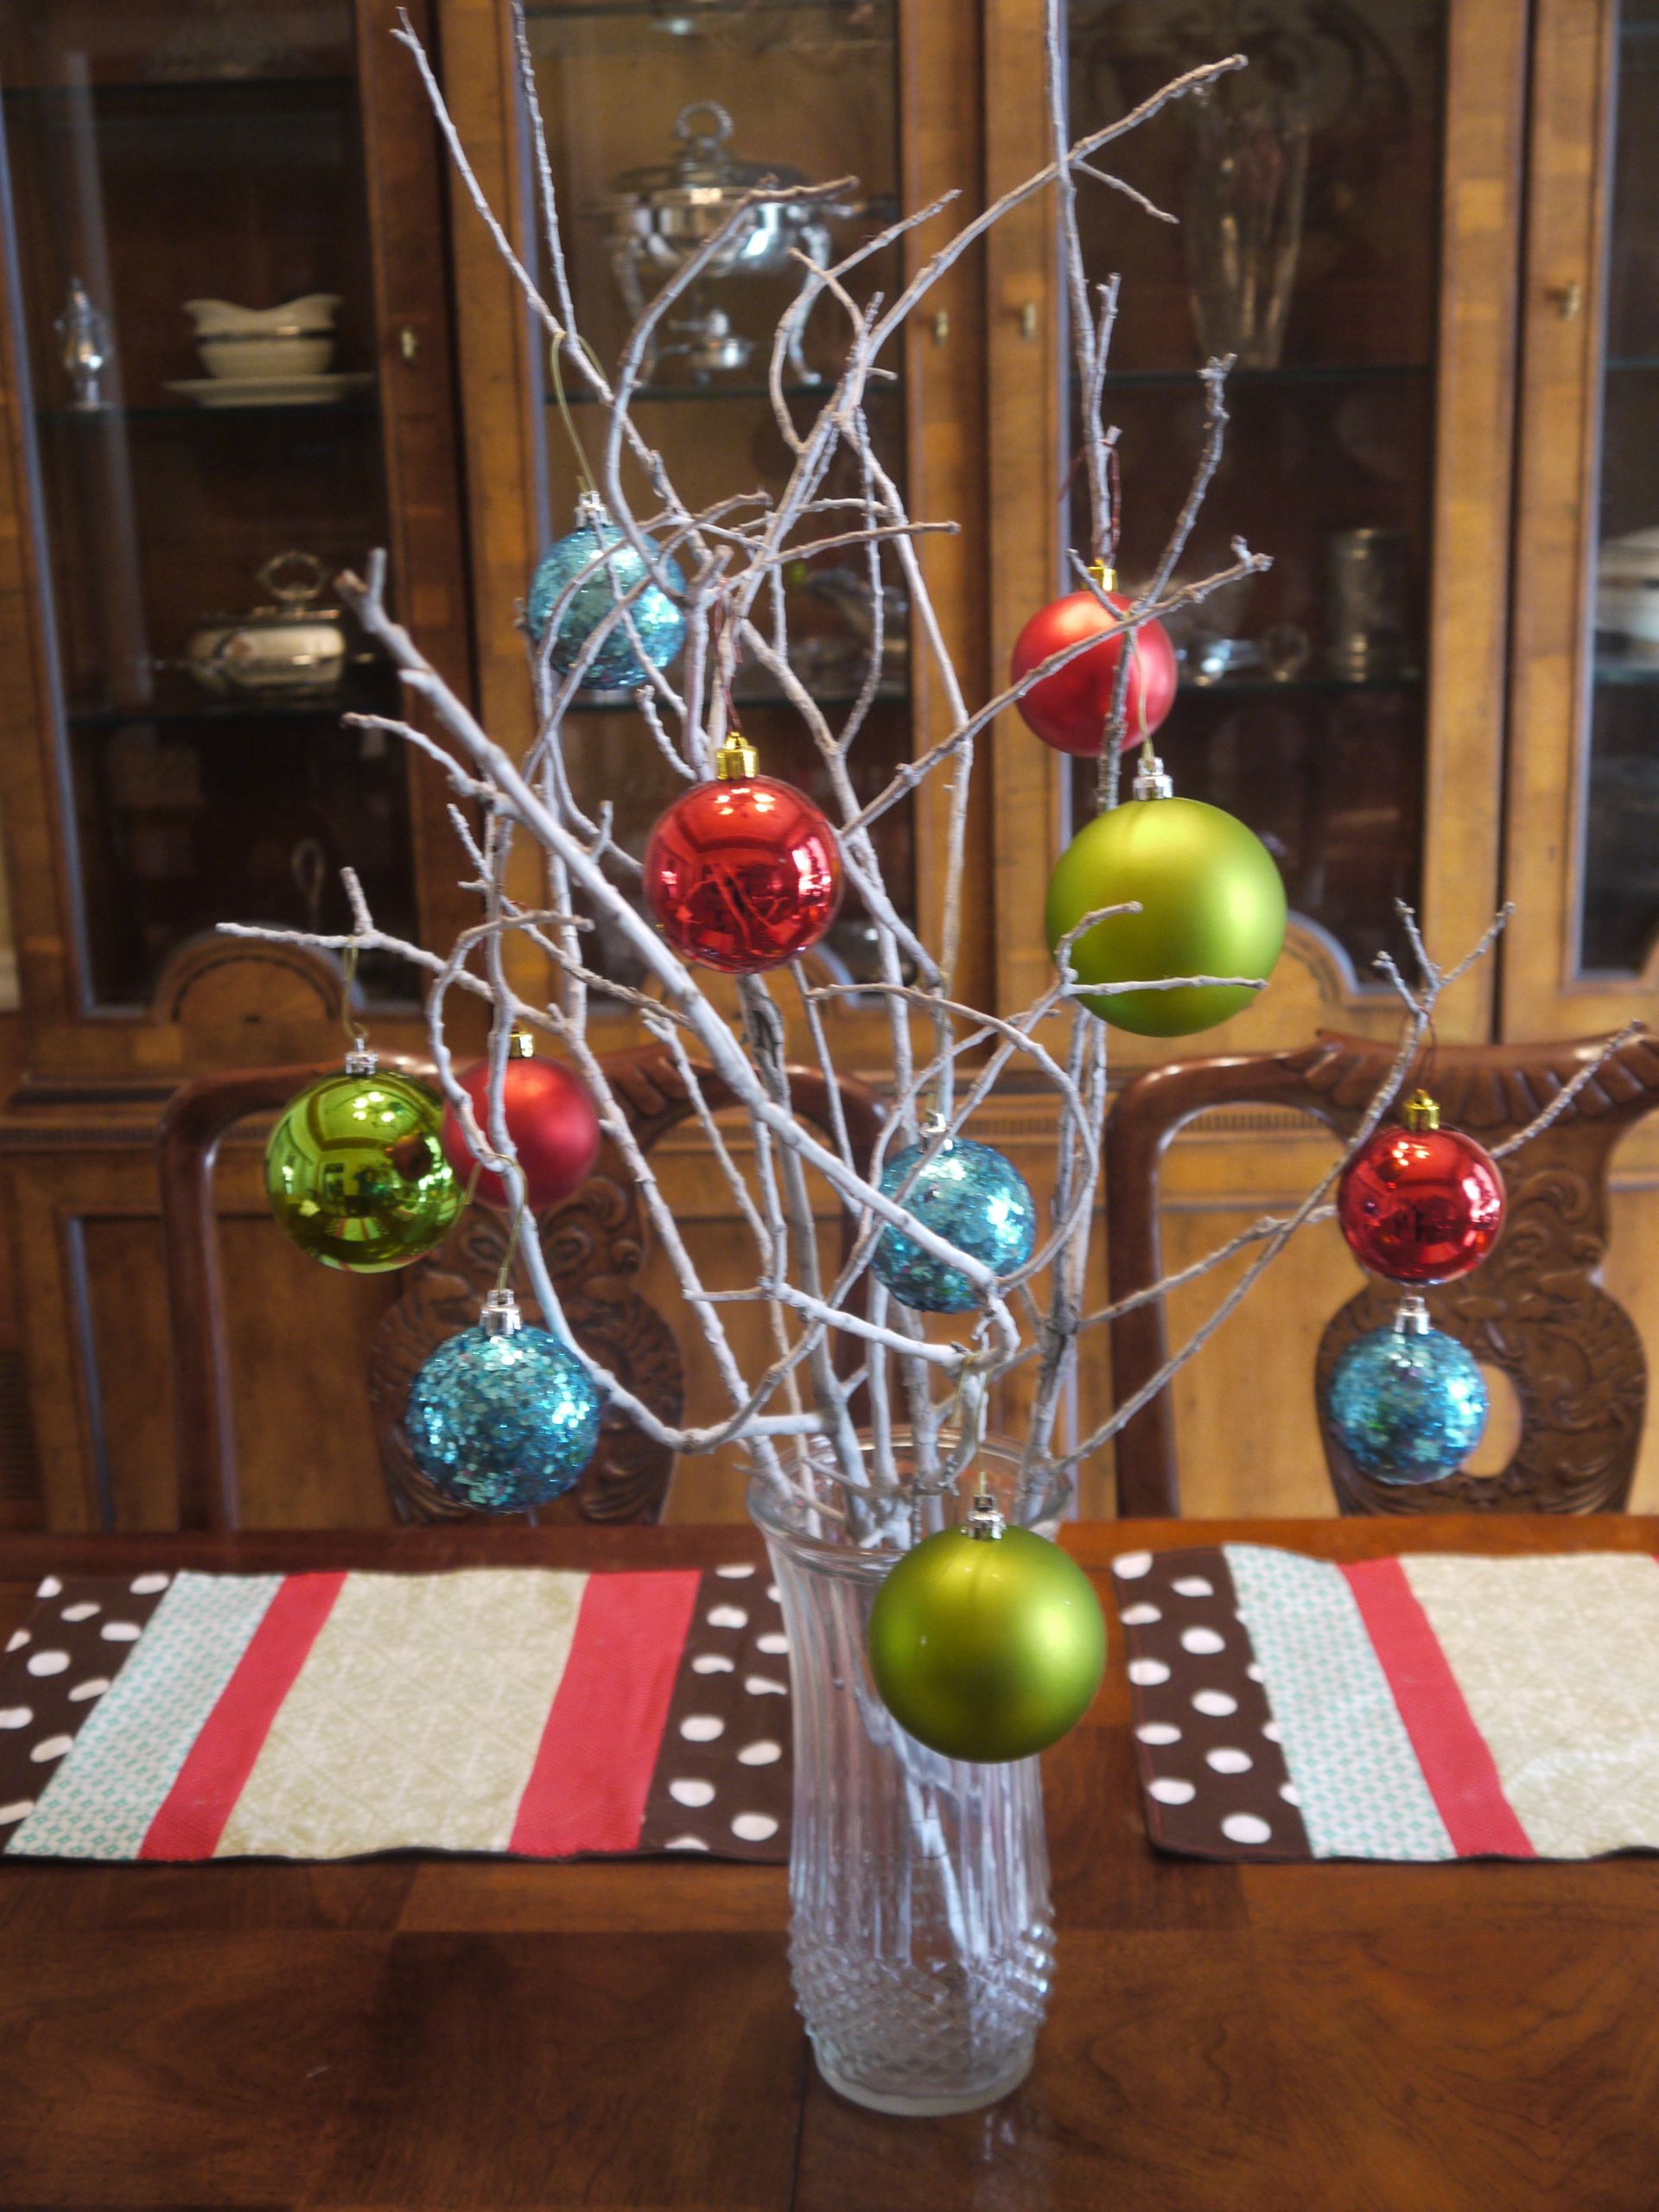 DIY Holiday Decorations Ideas
 70 Christmas Decorations Ideas To Try This Year A DIY